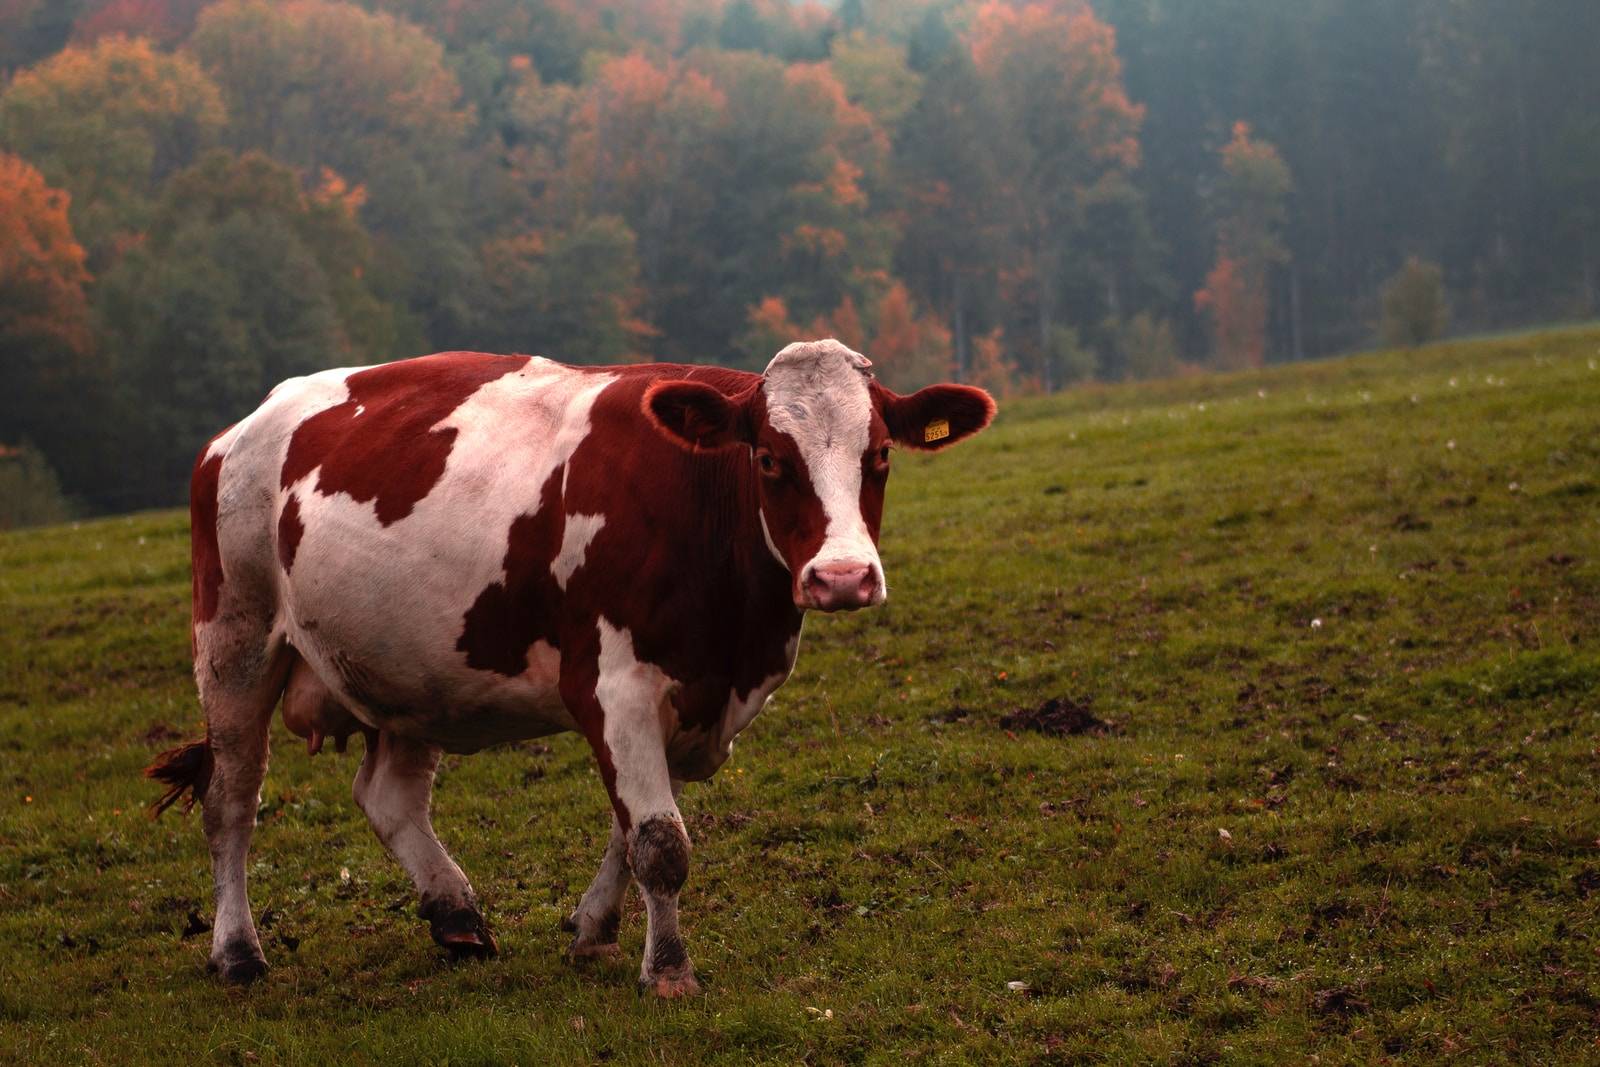 brown and white cow on green grass field during daytime